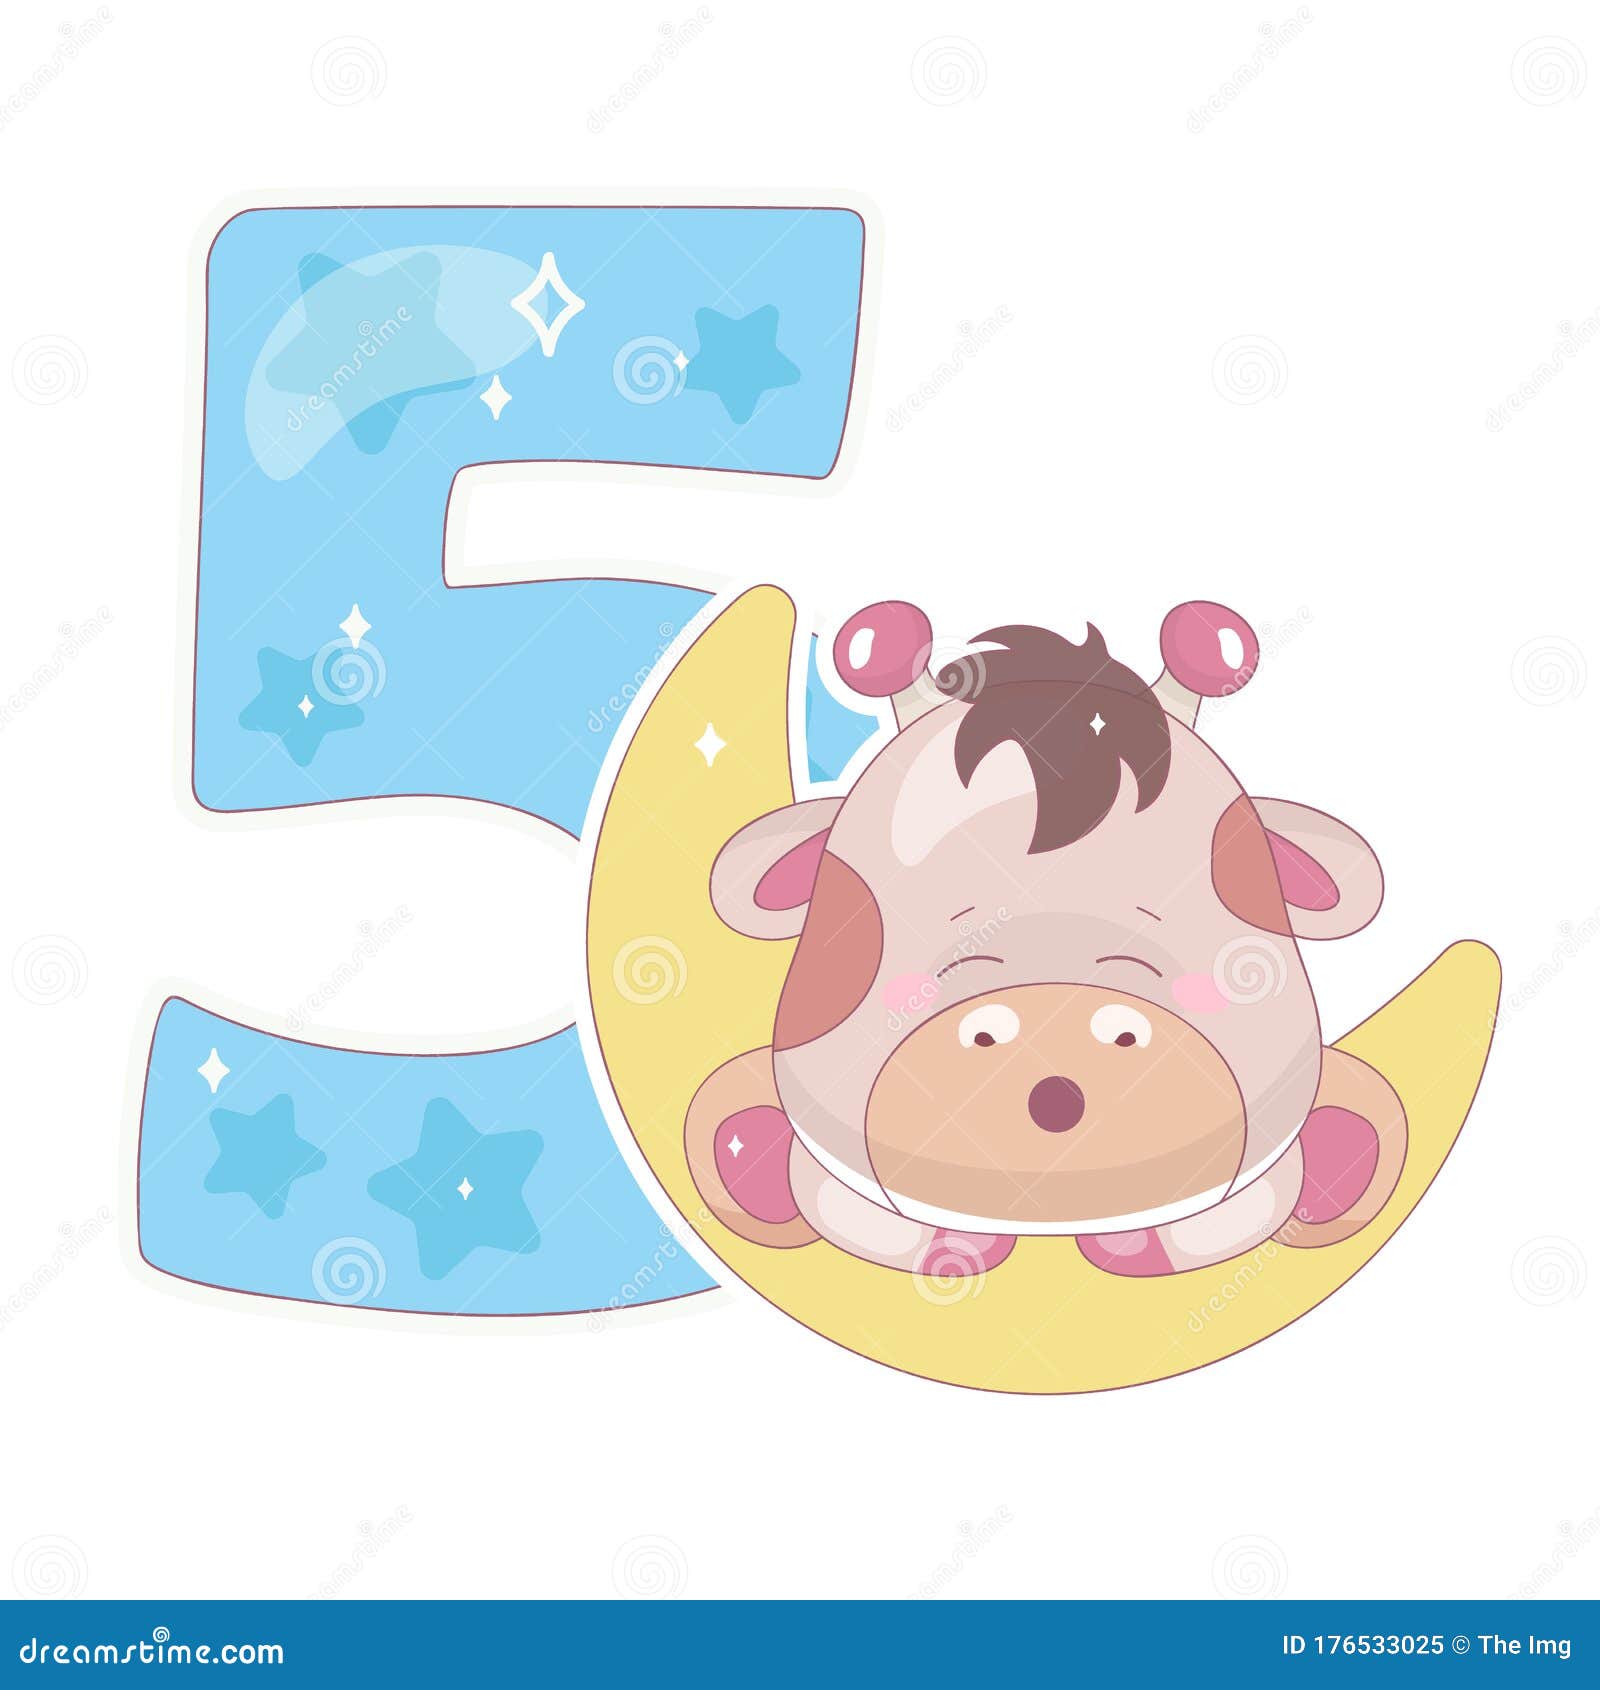 Cartoon Five Years Old Stock Illustrations – 44 Cartoon Five Years Old  Stock Illustrations, Vectors & Clipart - Dreamstime